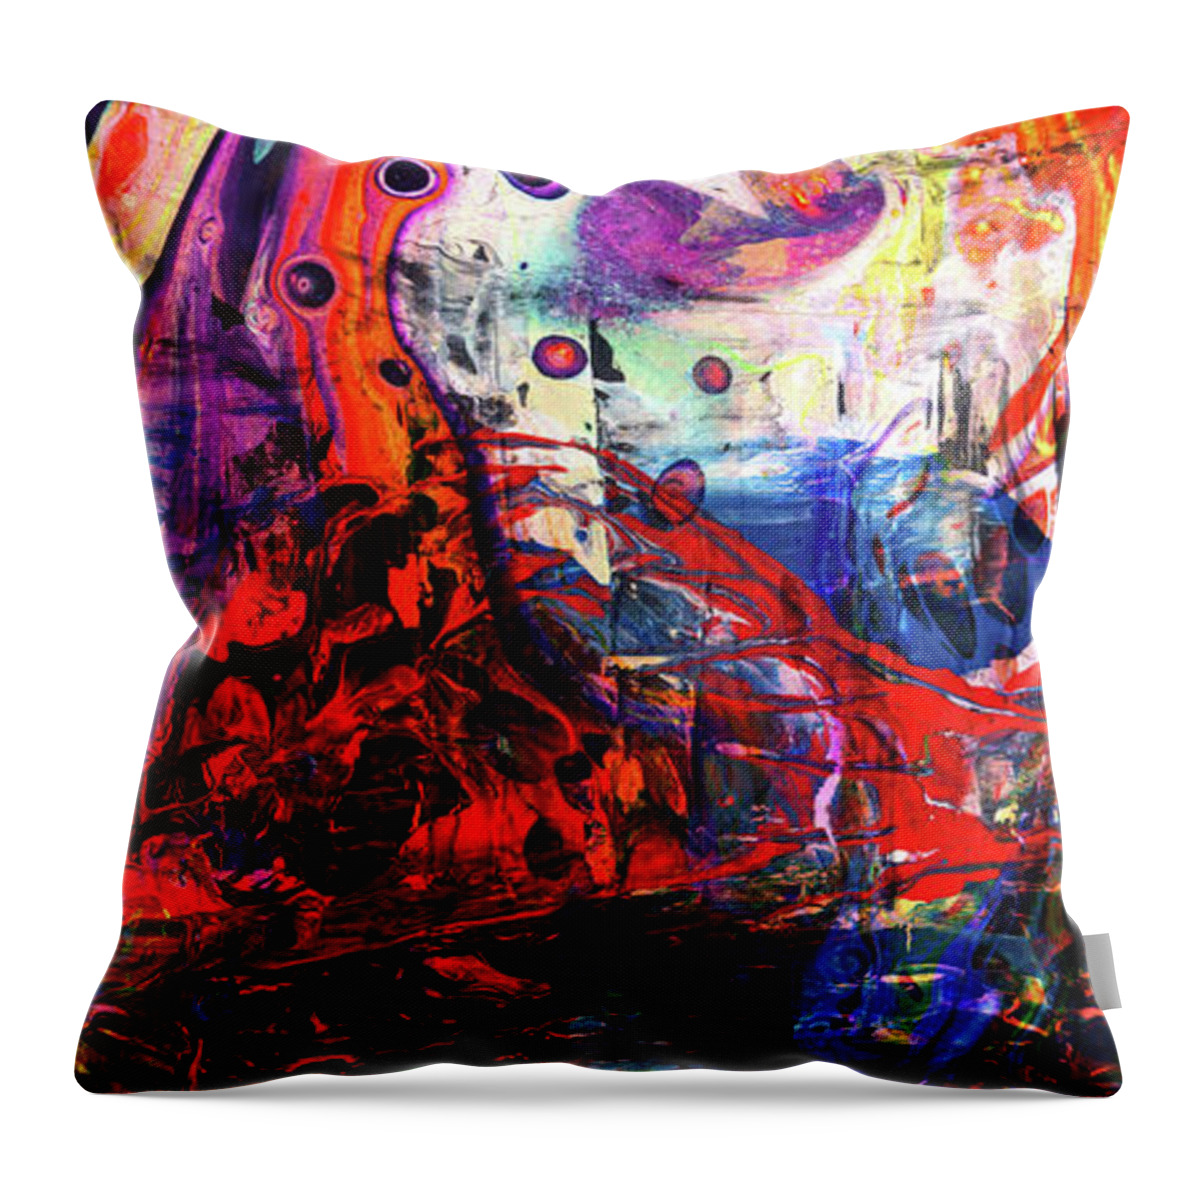 Abstract Throw Pillow featuring the painting Wonderland - Colorful Abstract Art Painting by Modern Abstract